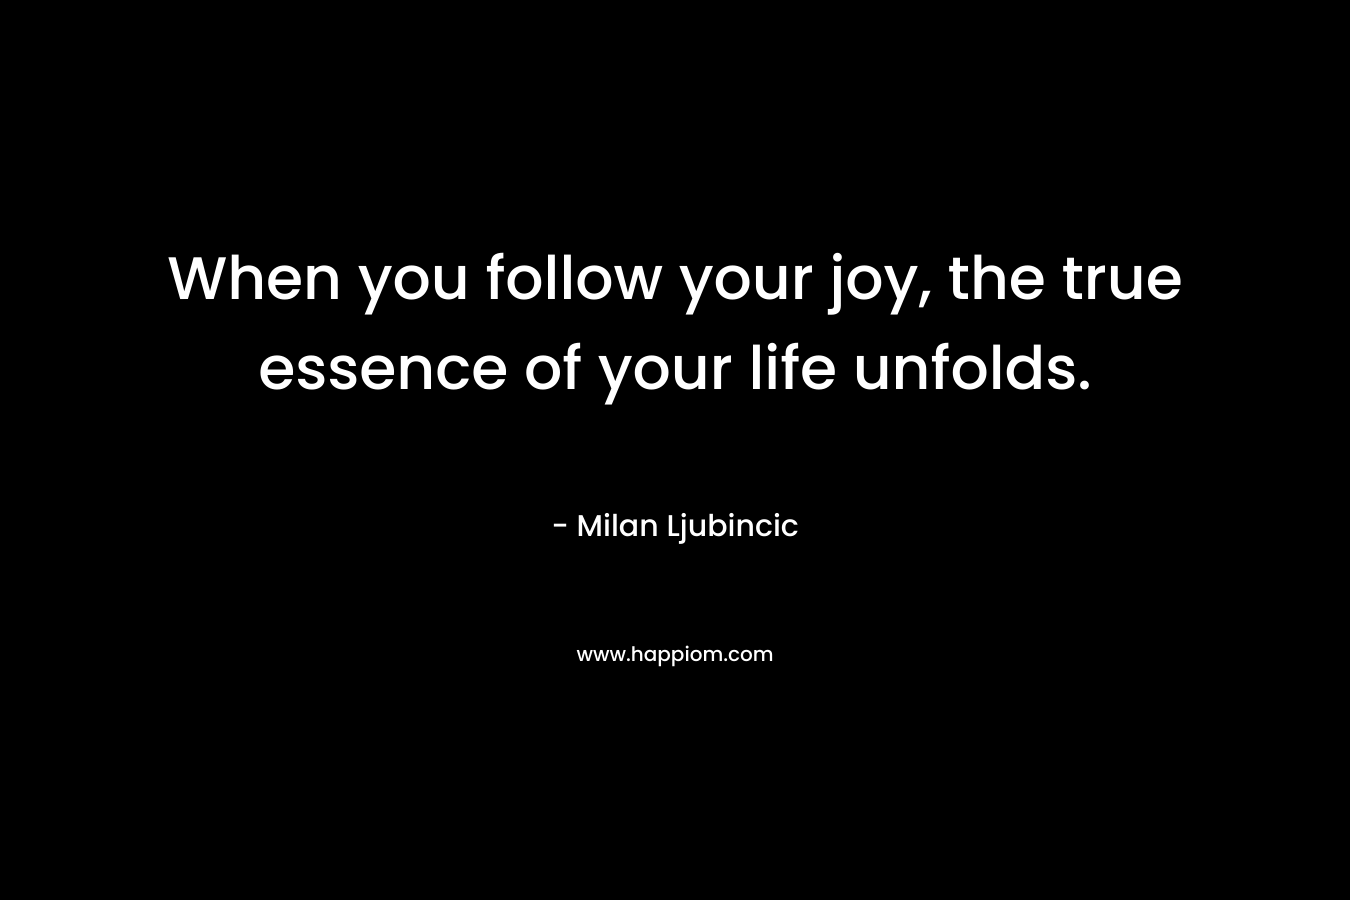 When you follow your joy, the true essence of your life unfolds. – Milan Ljubincic